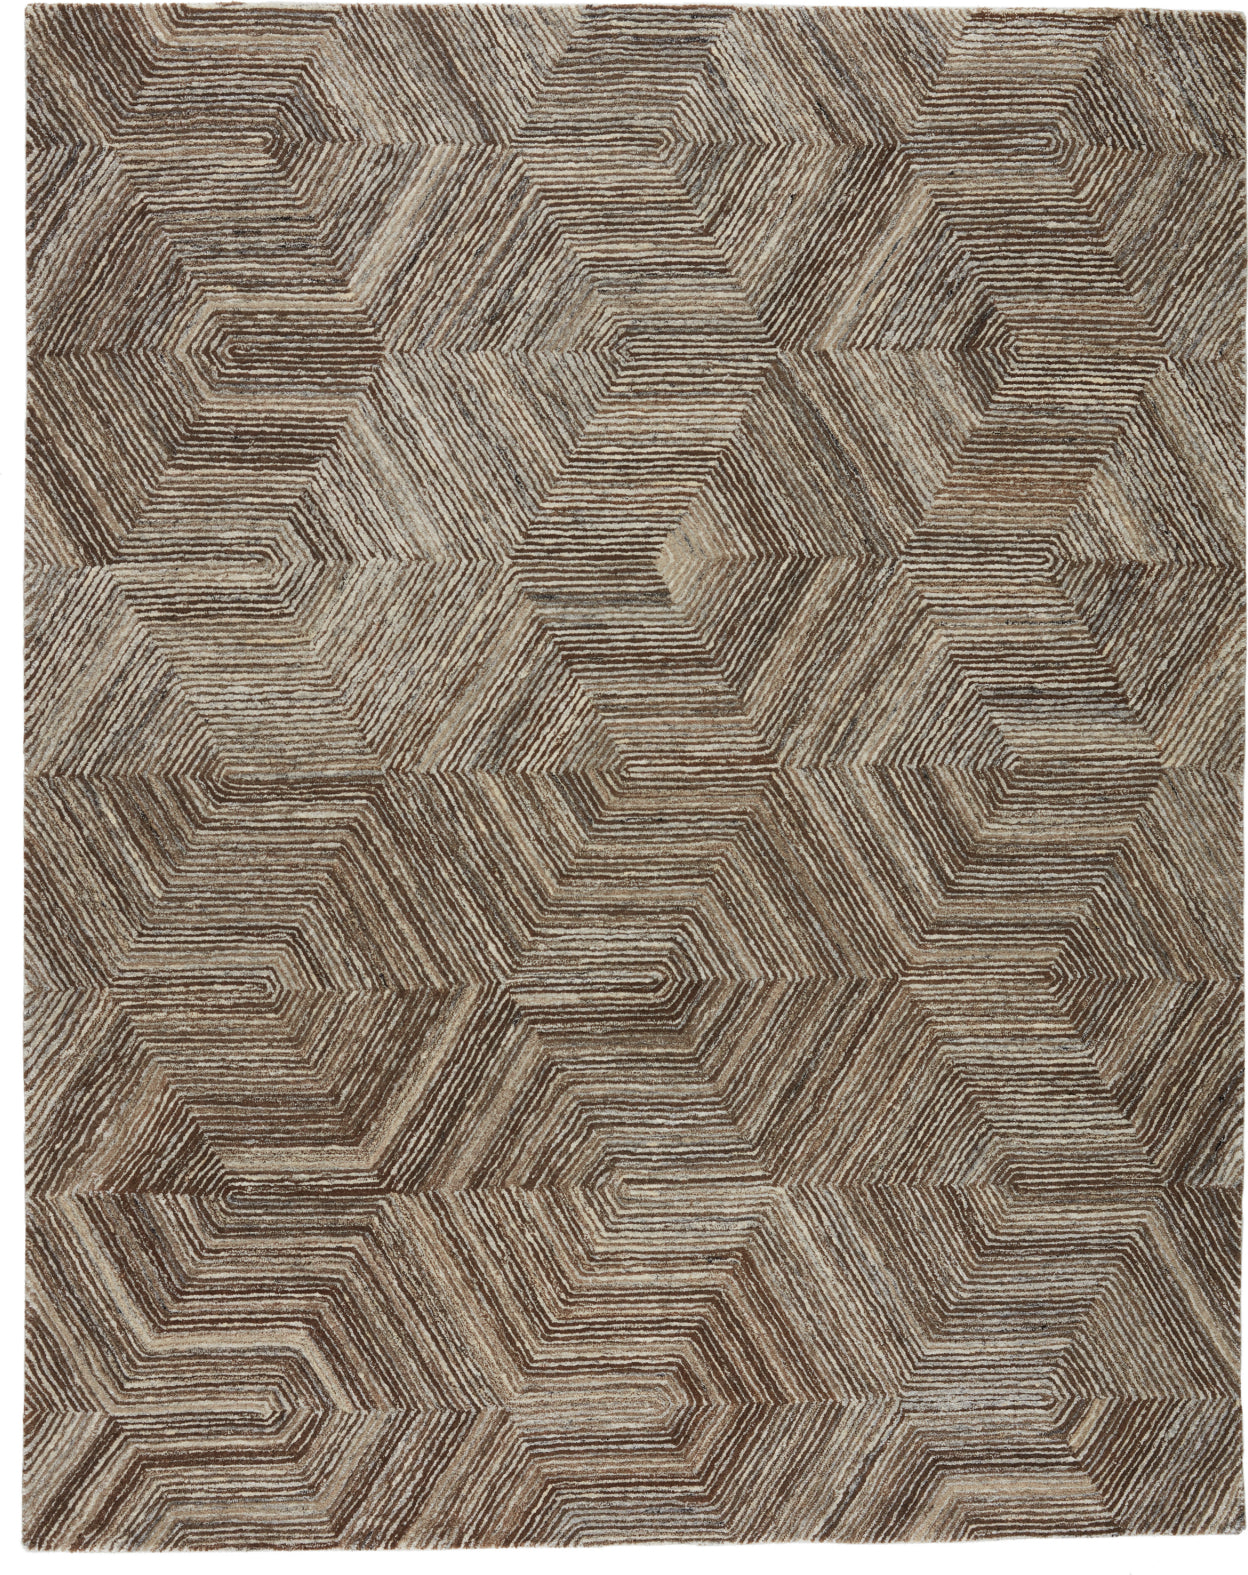 Jaipur Living Pathways by Verde Home Rome PVH05 Brown/Light Gray Area Rug - Top Down